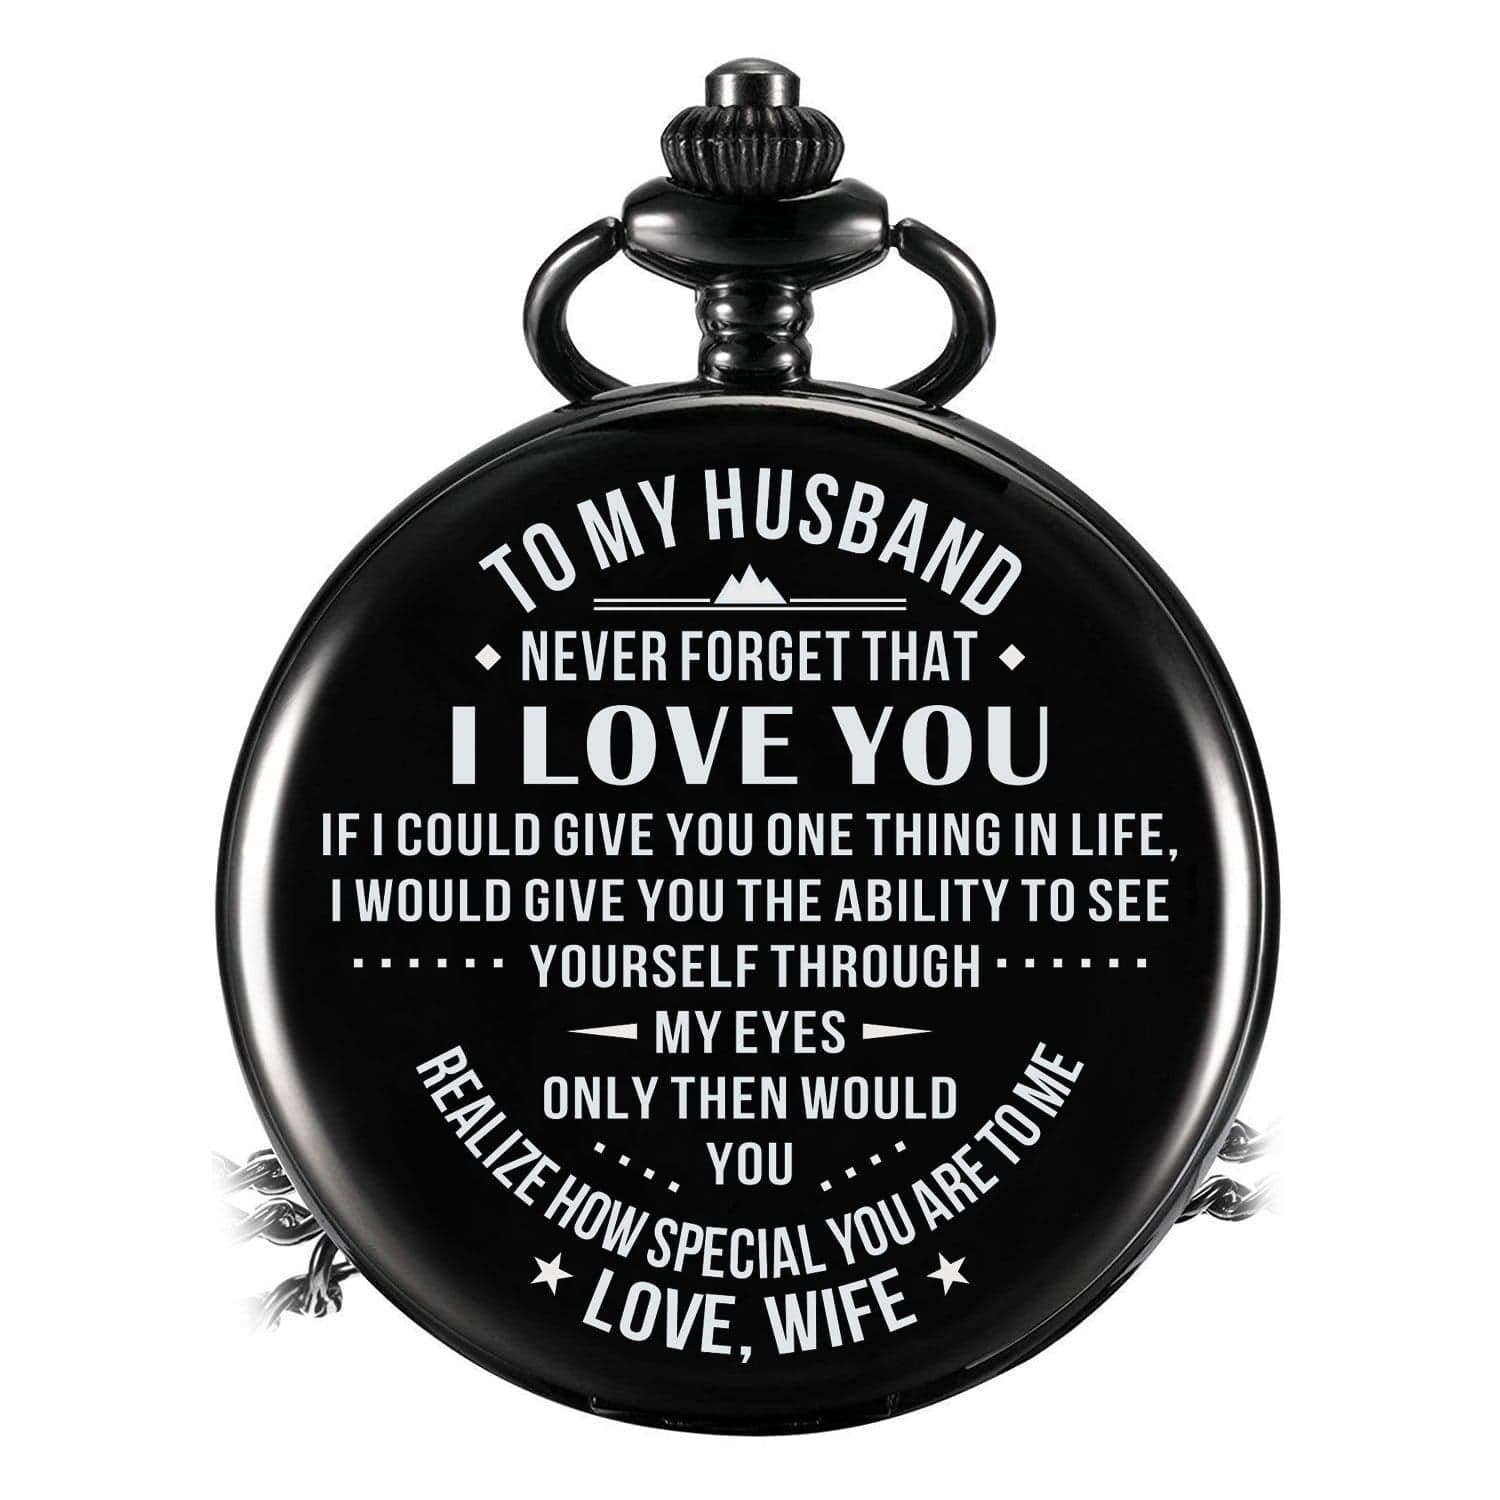 Pocket Watches For Husband To My Husband - You Realize How Special You Are To Me Pocket Watch GiveMe-Gifts